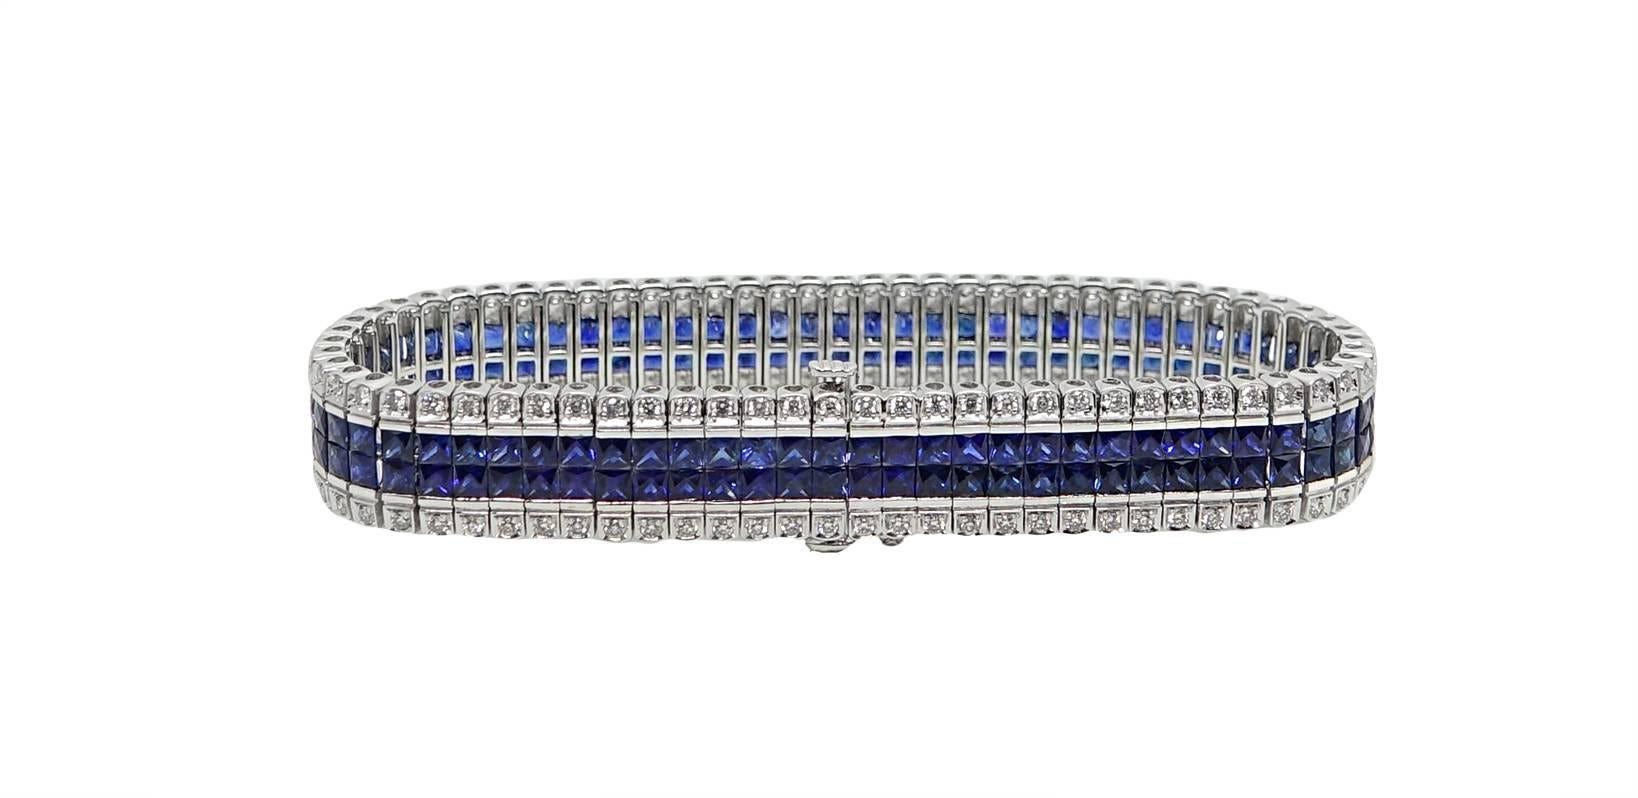 This 18K White Gold Bracelet Has Approximately 142 French Cut Blue Sapphires Weighing A Total Carat Weight Of 15.21 Carats, and Approximately 142 Round Diamonds Weighing A Total Carat Weight Of 1.53 Carats, G-H Color VS2-SI1 Clarity. This Bracelet